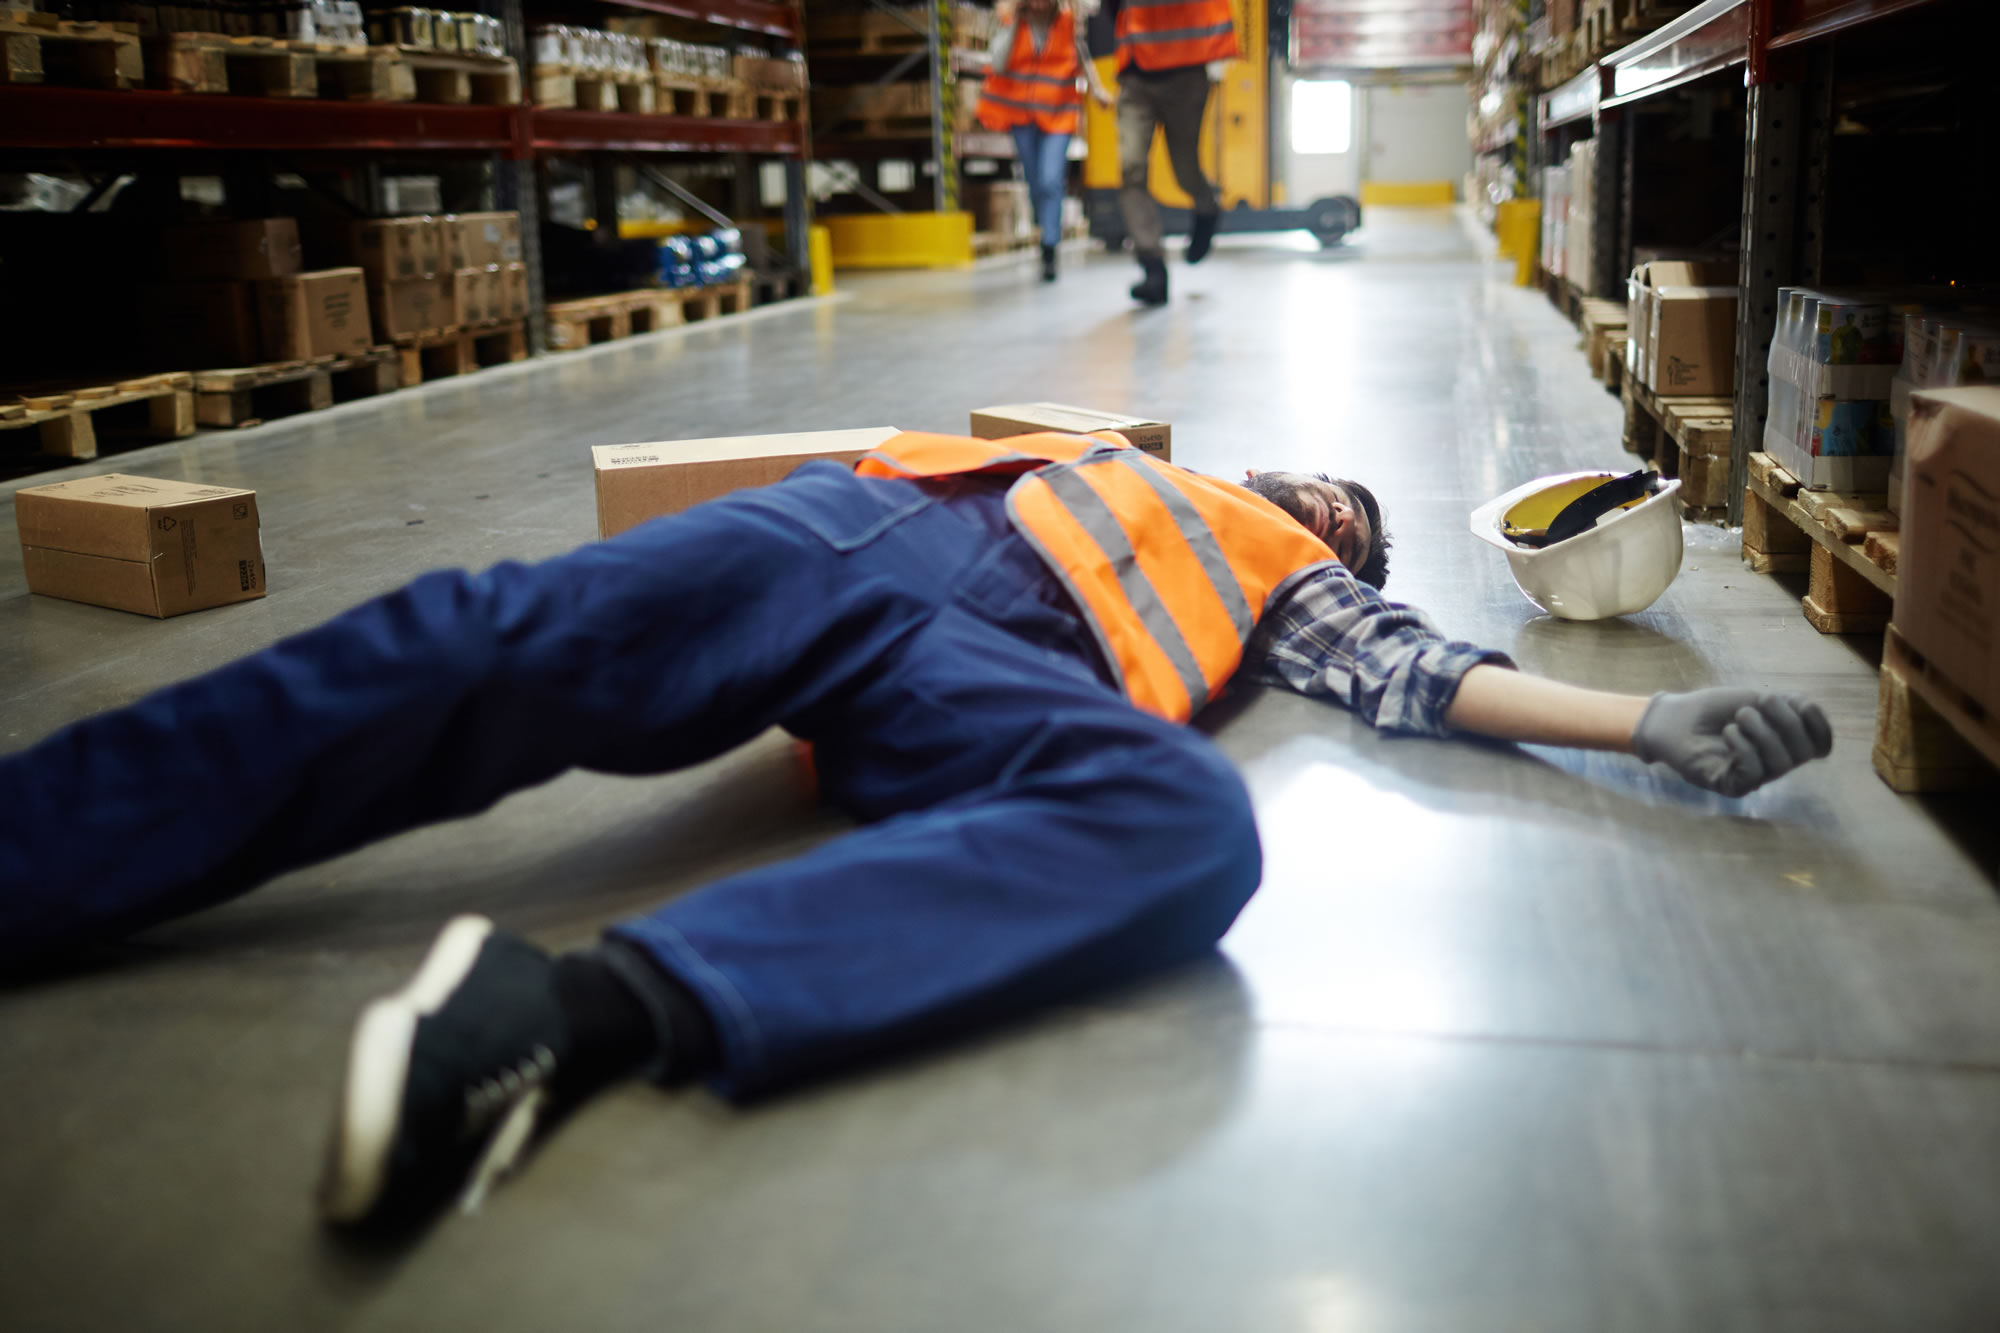 Workplace Slip, Trip or Fall compensation claims Wakefield - slip and trip hazards in the workplace, suing employer for negligence